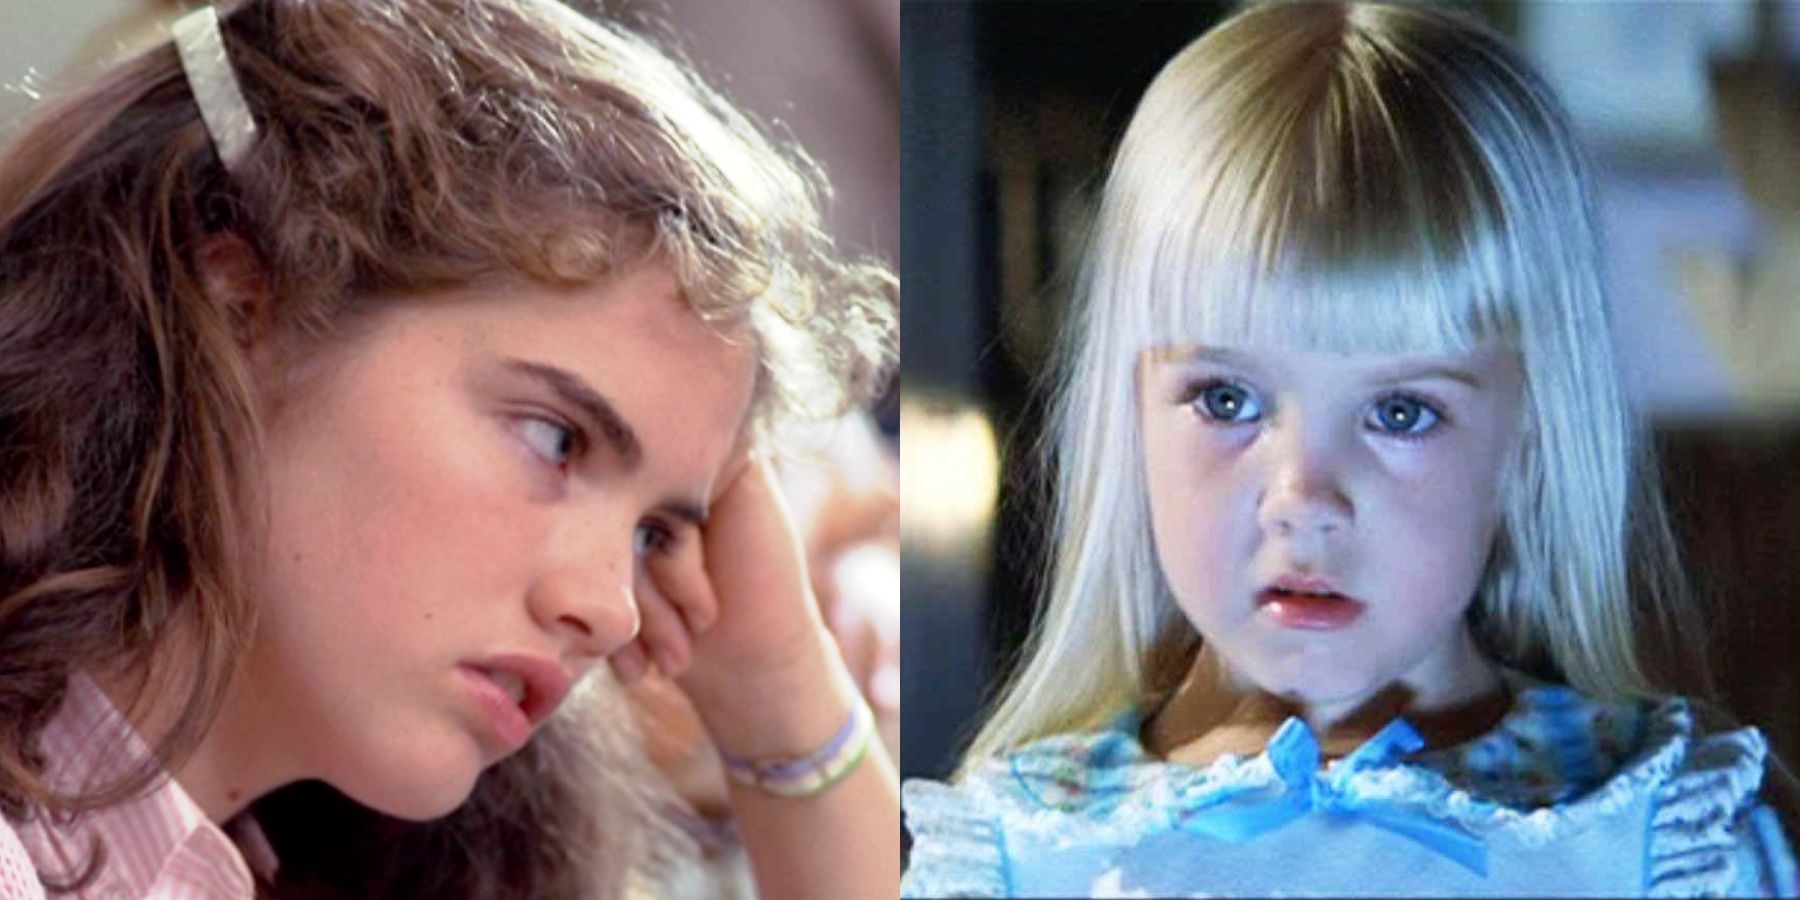 Split image of Nancy Thompson in A Nightmare On Elm Street and Carol Ann Freeing in Poltergeist